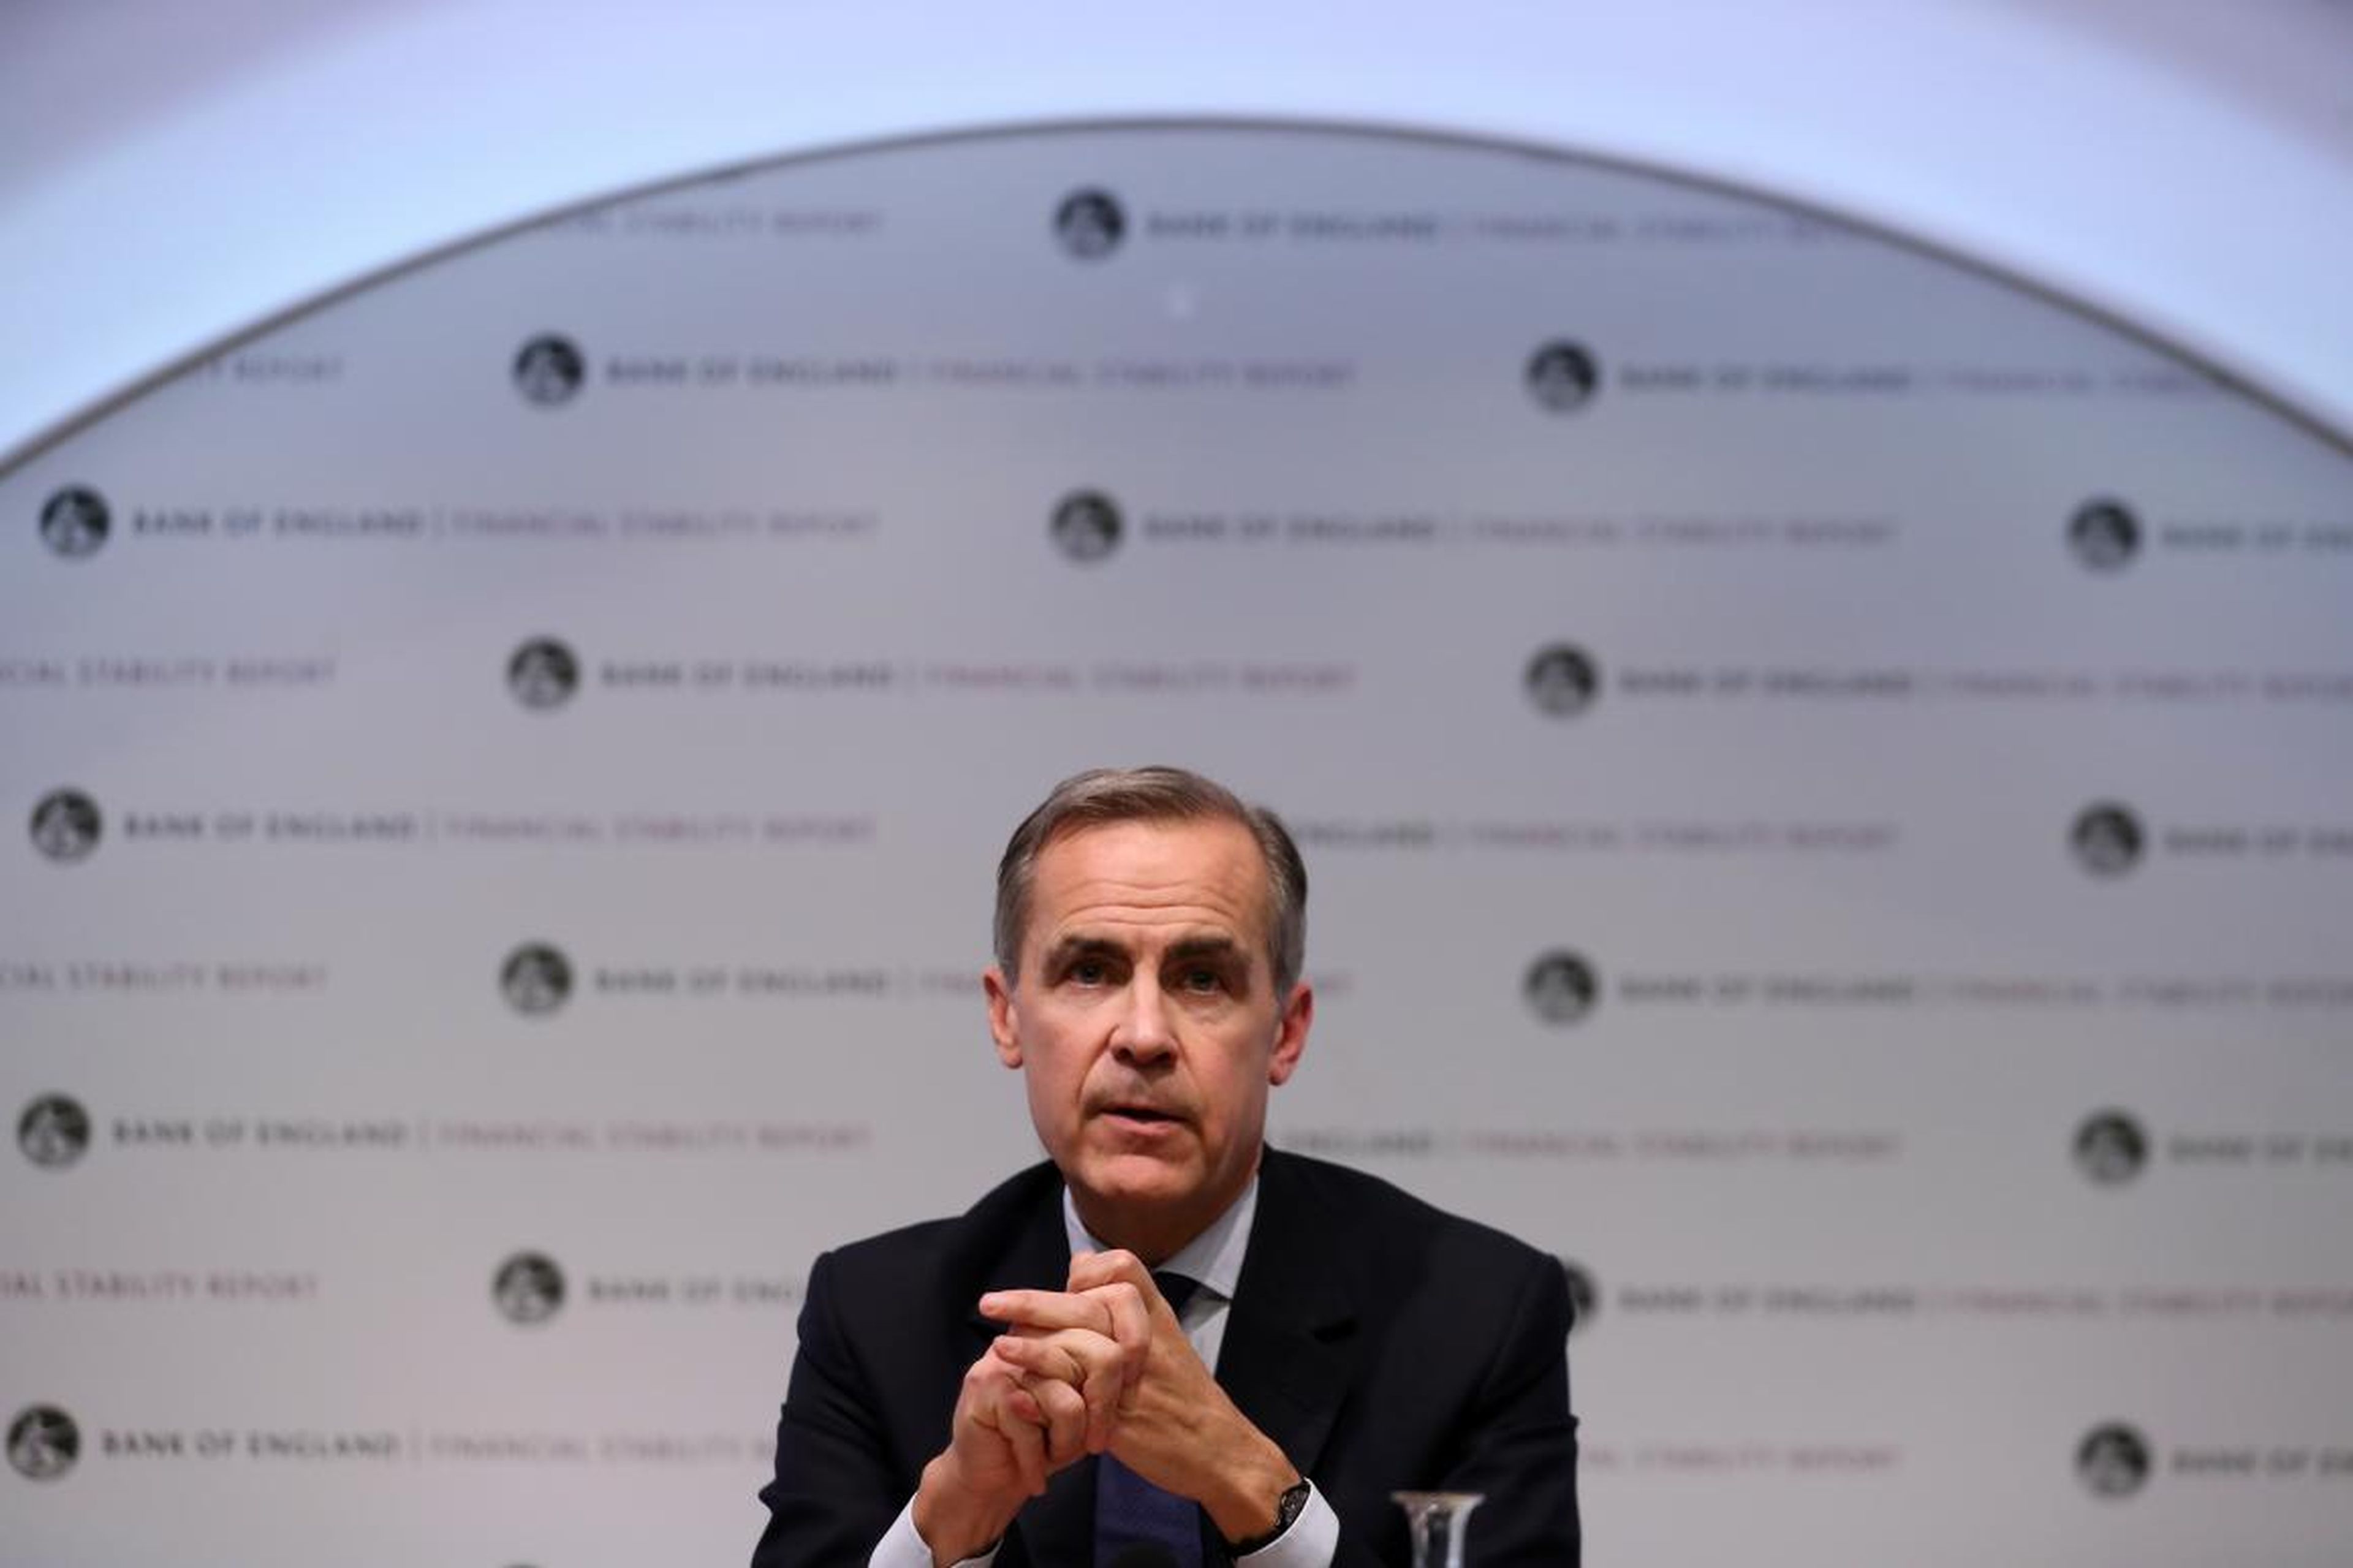 Mark Carney hosts a Financial Stability Report press conference at the Bank of England.